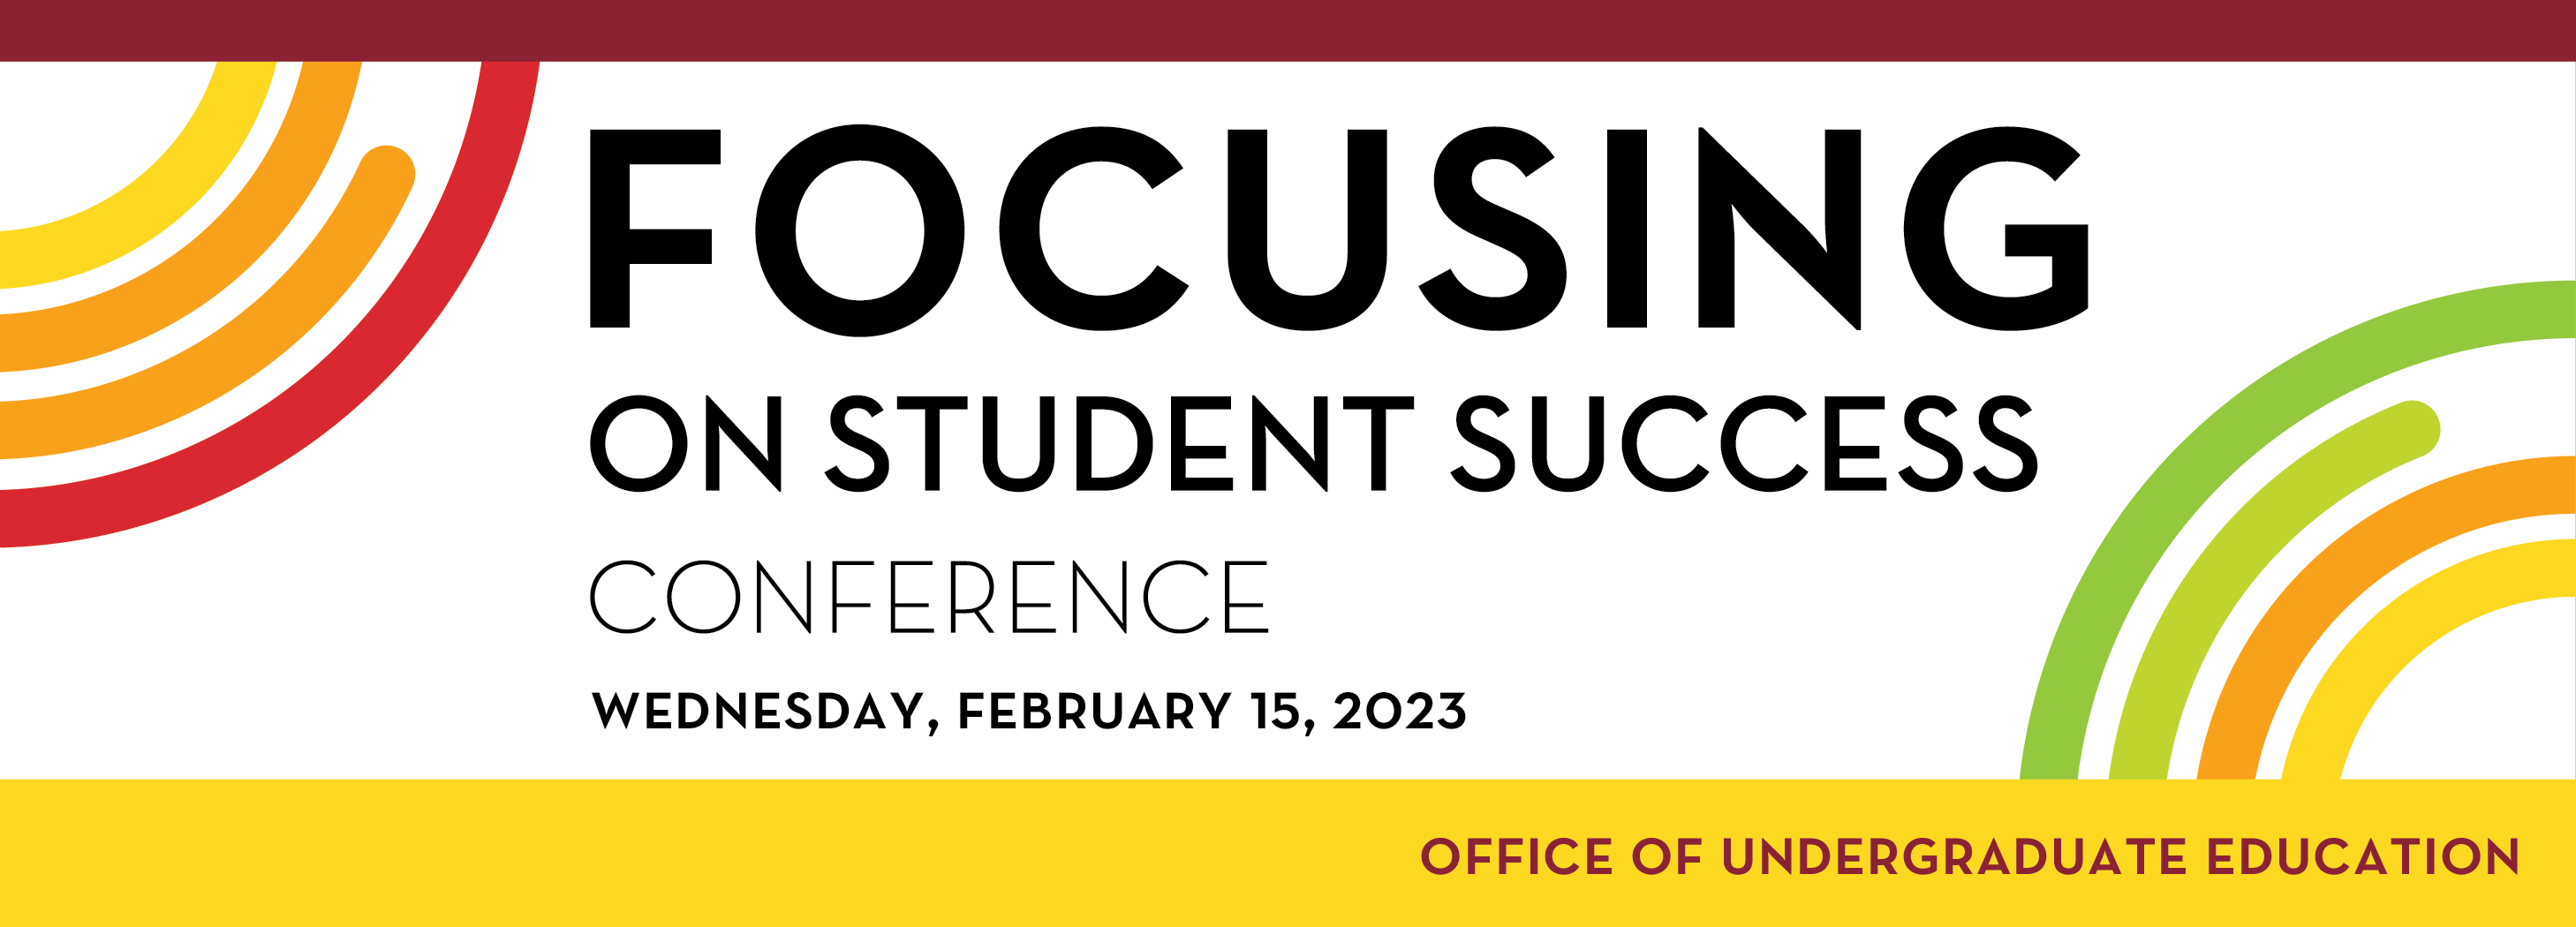 focusing_on_student_success_email_header_save_the_date-01.png